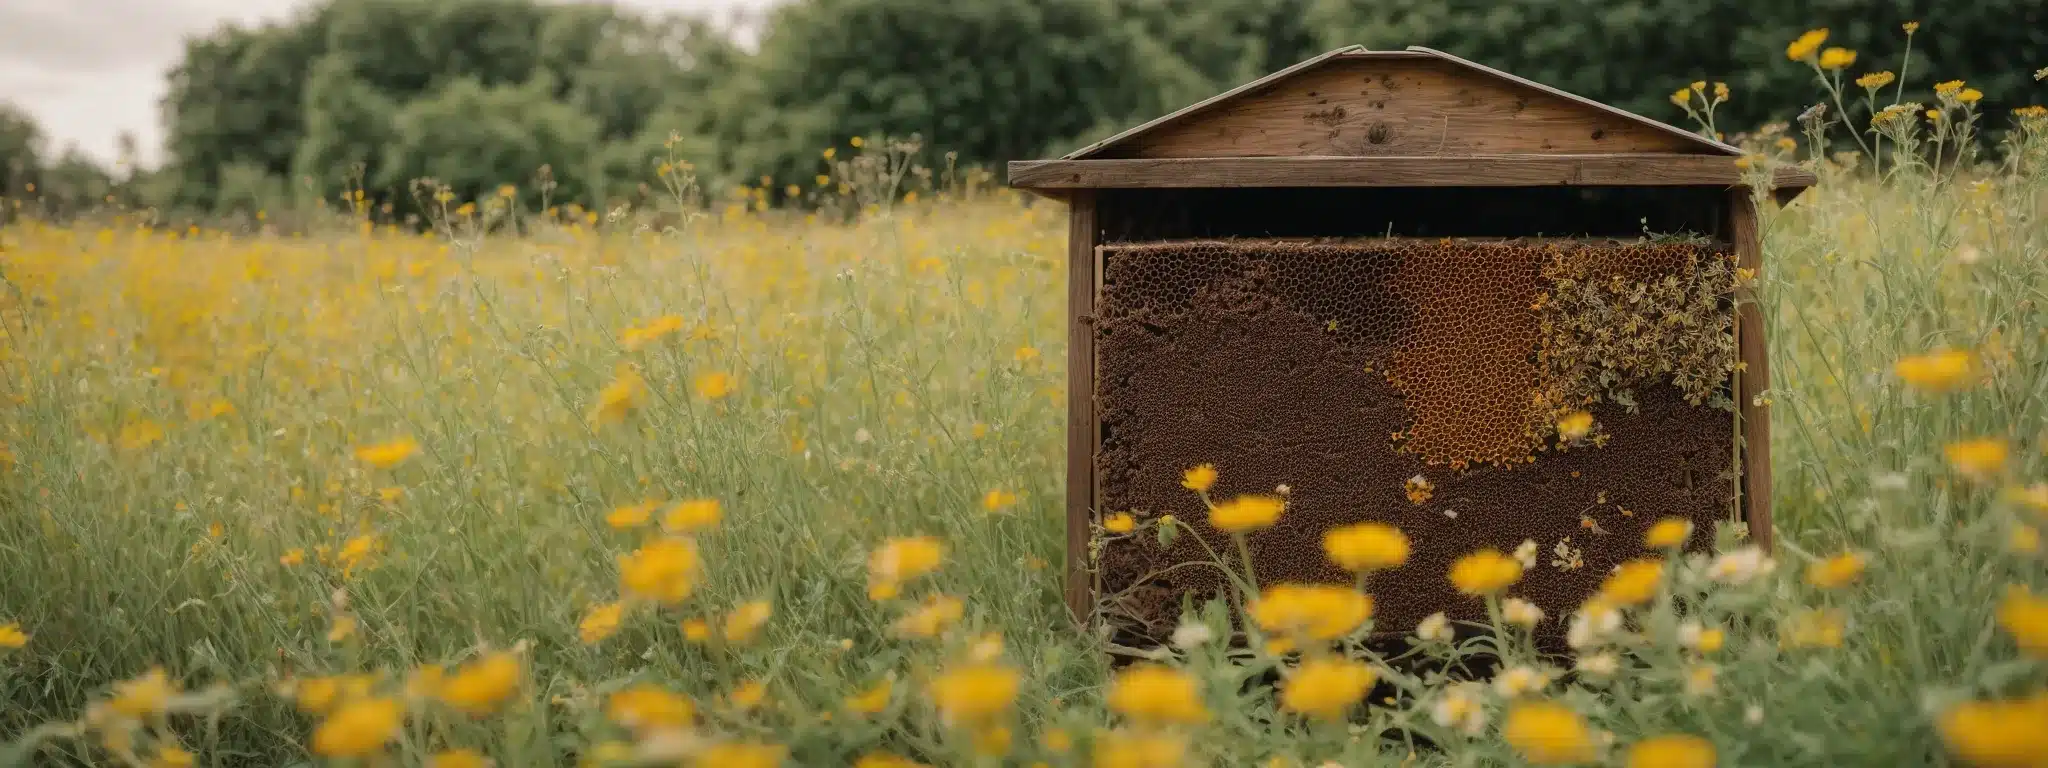 A Hive Thrives In A Wildflower Meadow, Symbolizing The Synergy And Harmony Of A Holistic Growth Strategy.